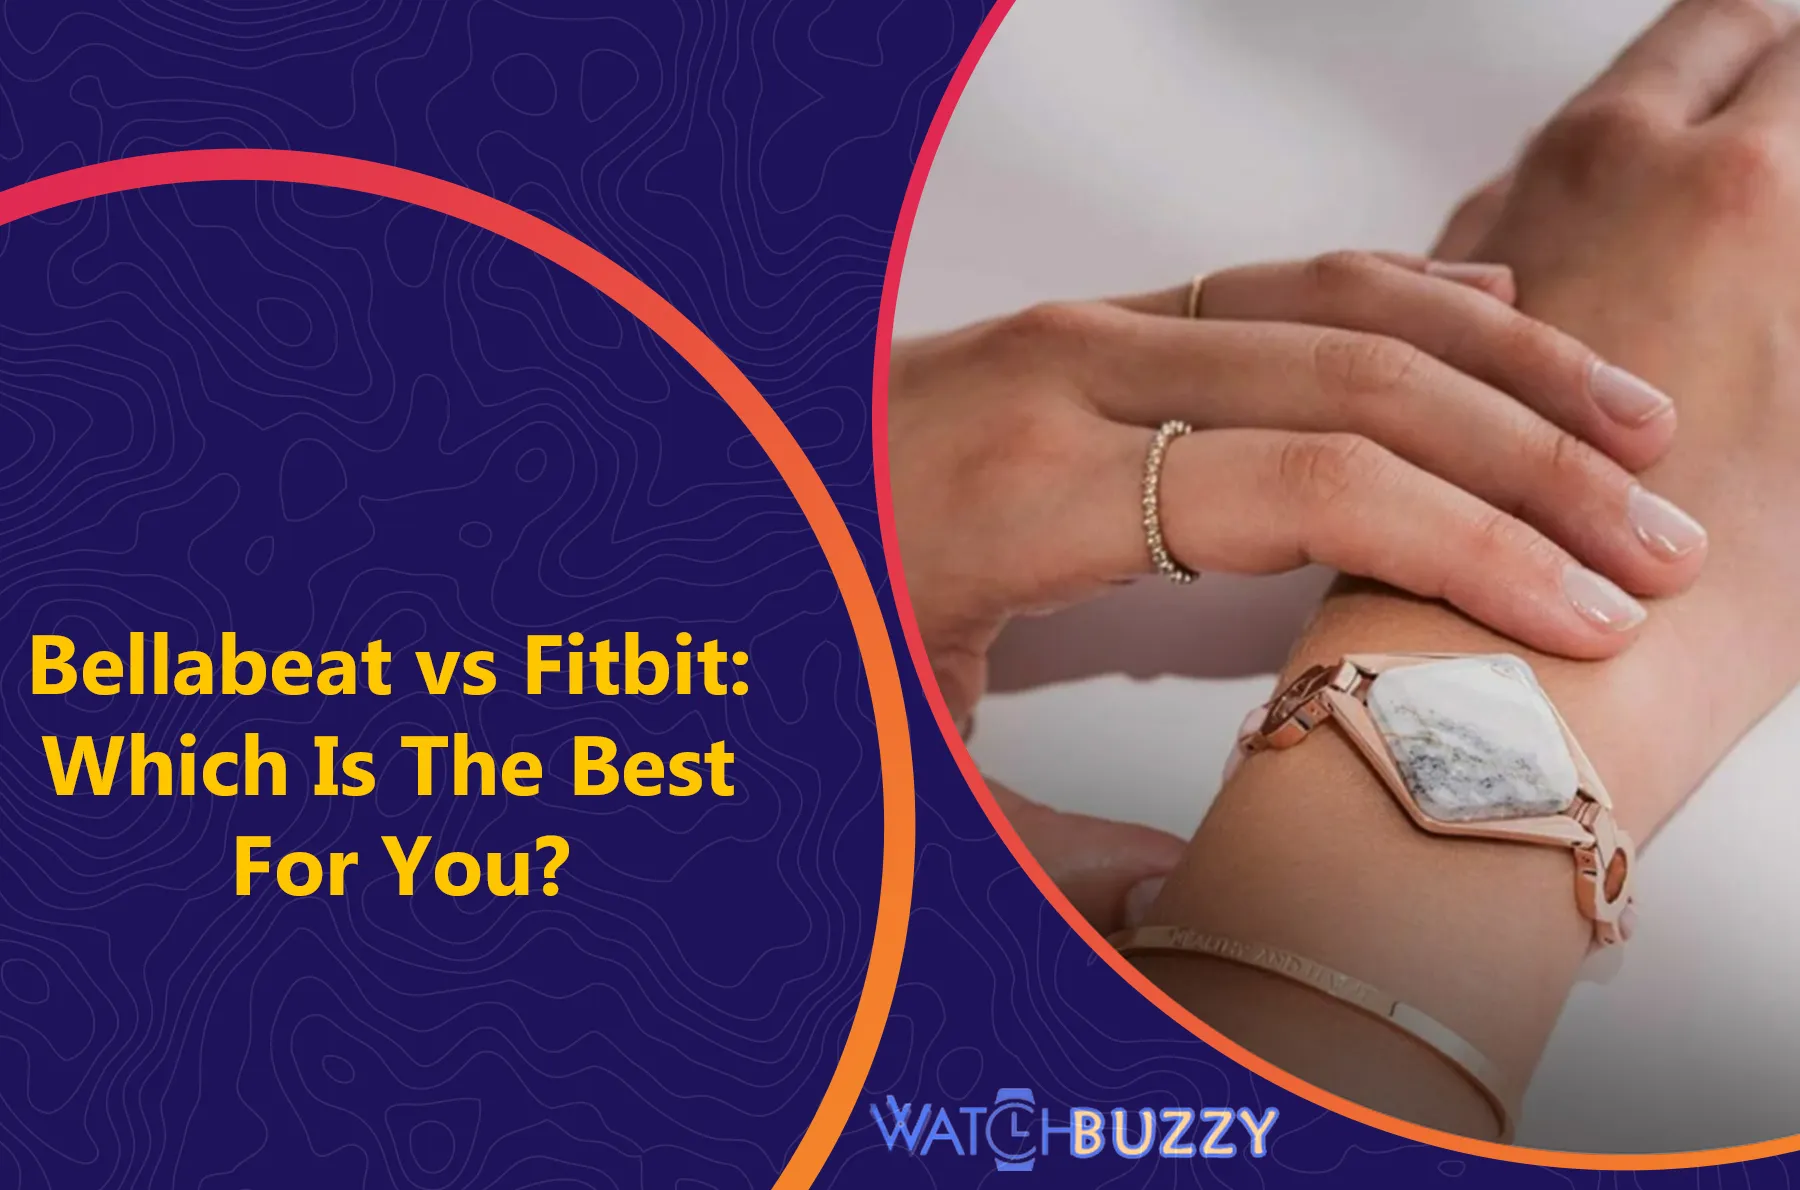 Bellabeat vs Fitbit: Which Is The Best For You?